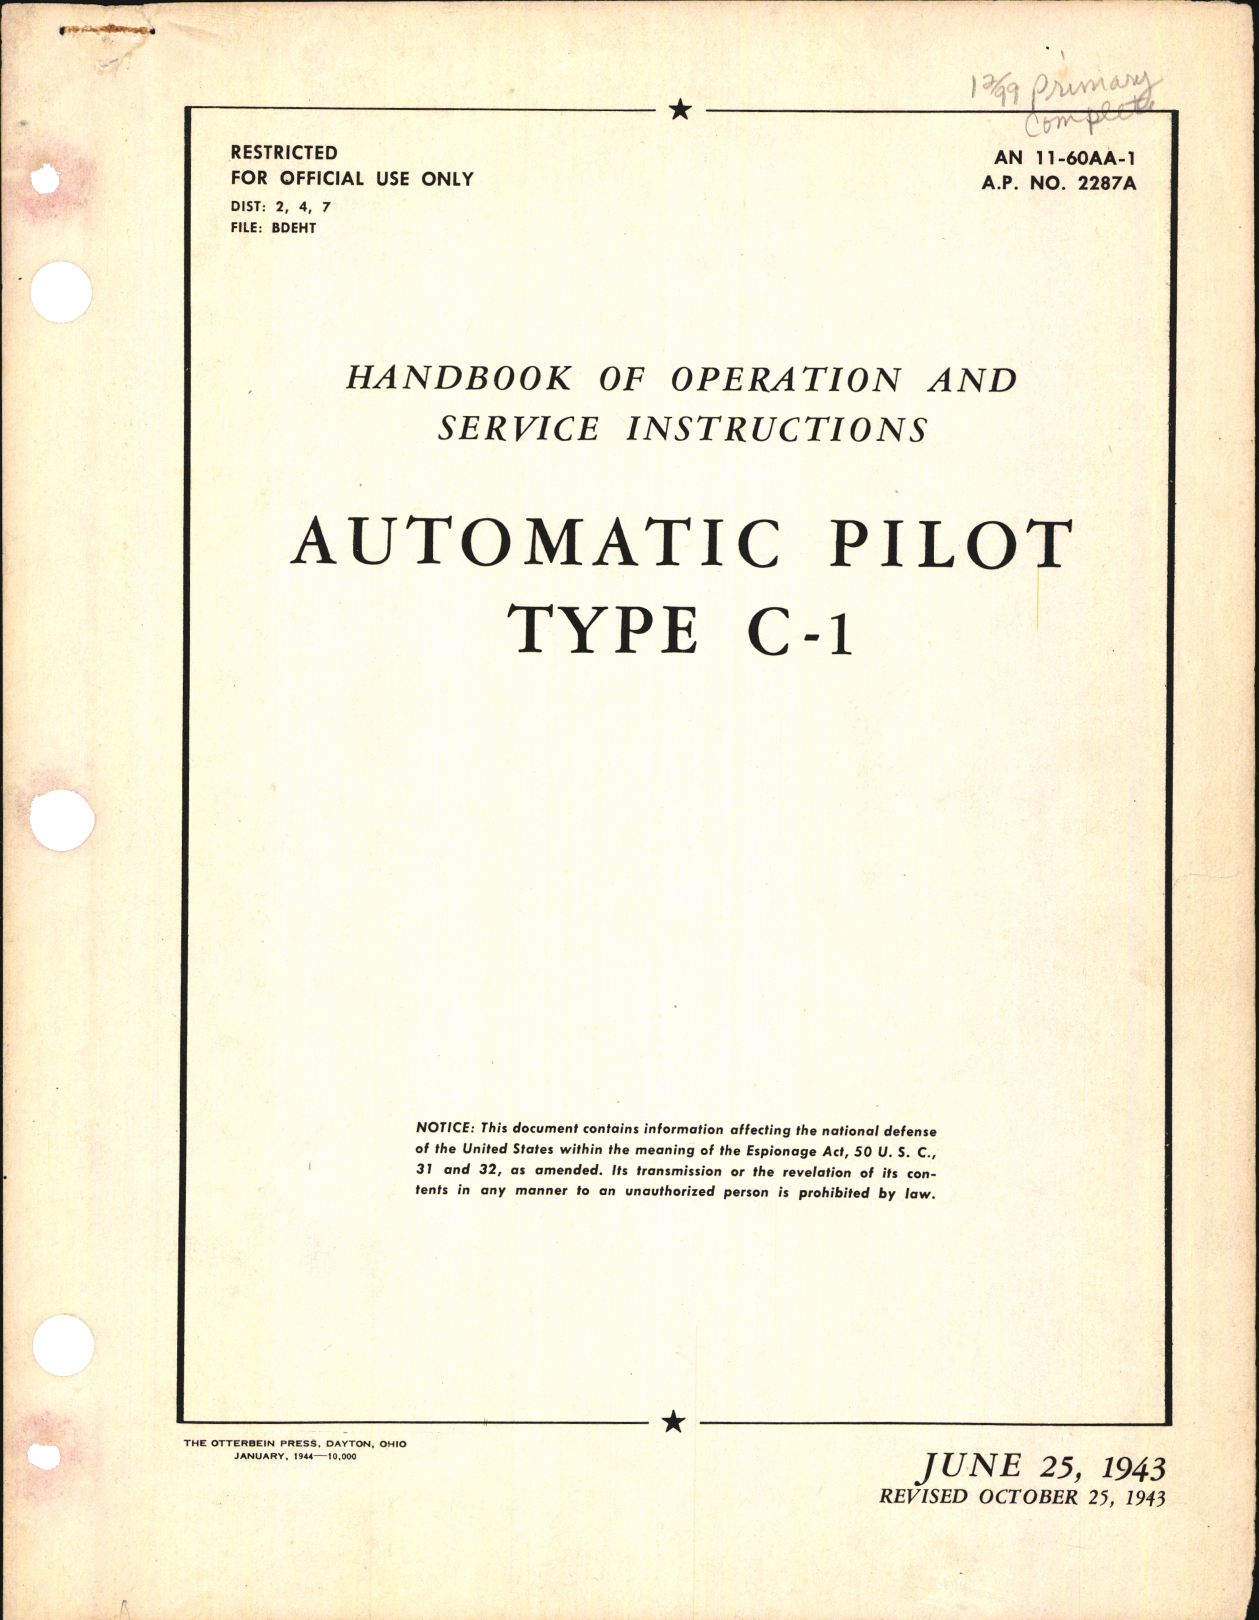 Sample page 1 from AirCorps Library document: Handbook of Operation and Service Instructions for Automatic Pilot Type C-1